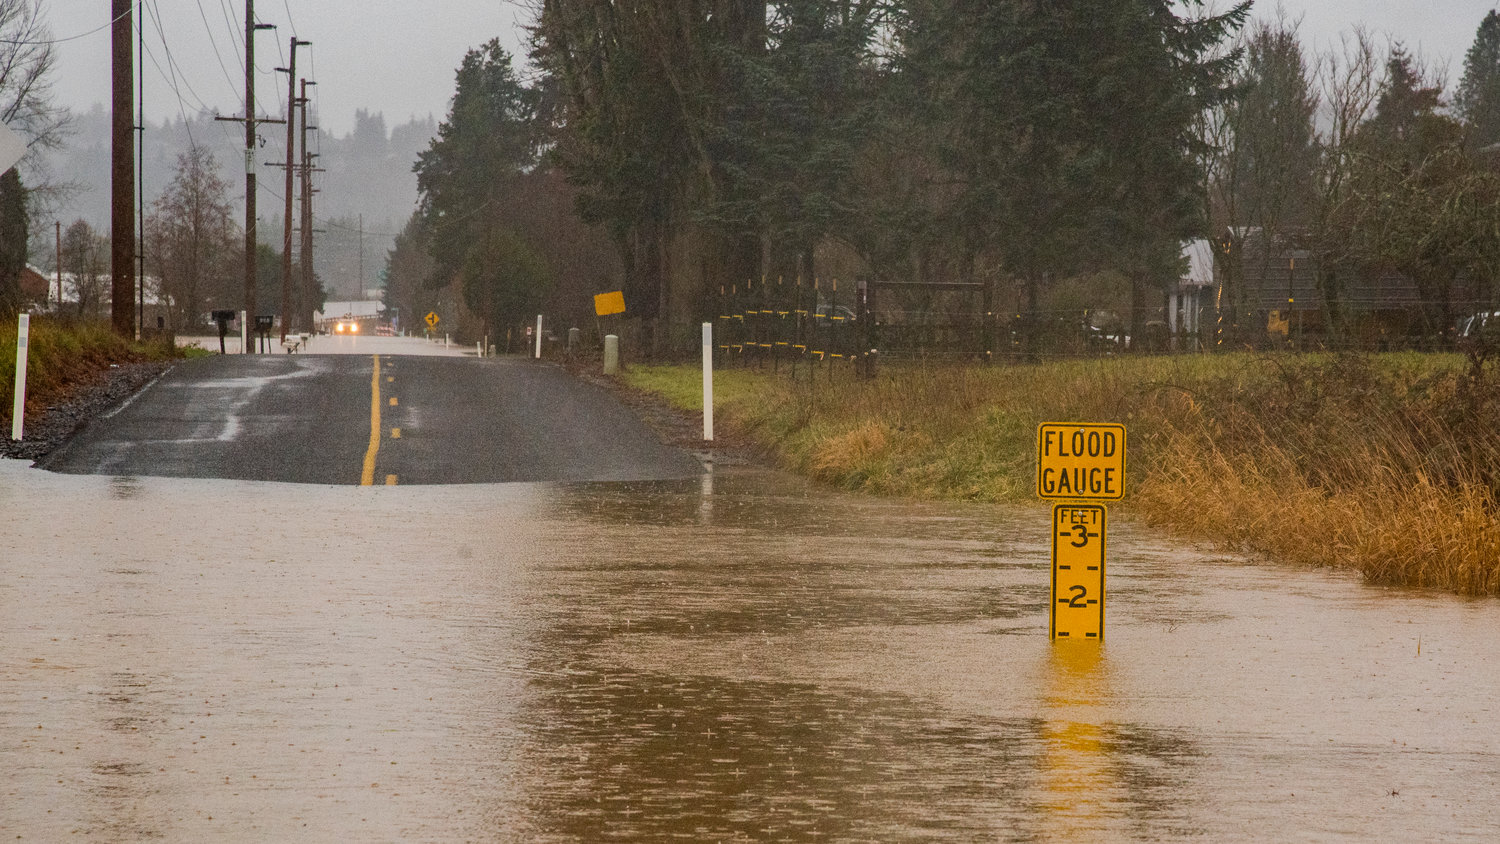 Water rises on a flood gauge along Hamilton Road in Chehalis on Thursday.